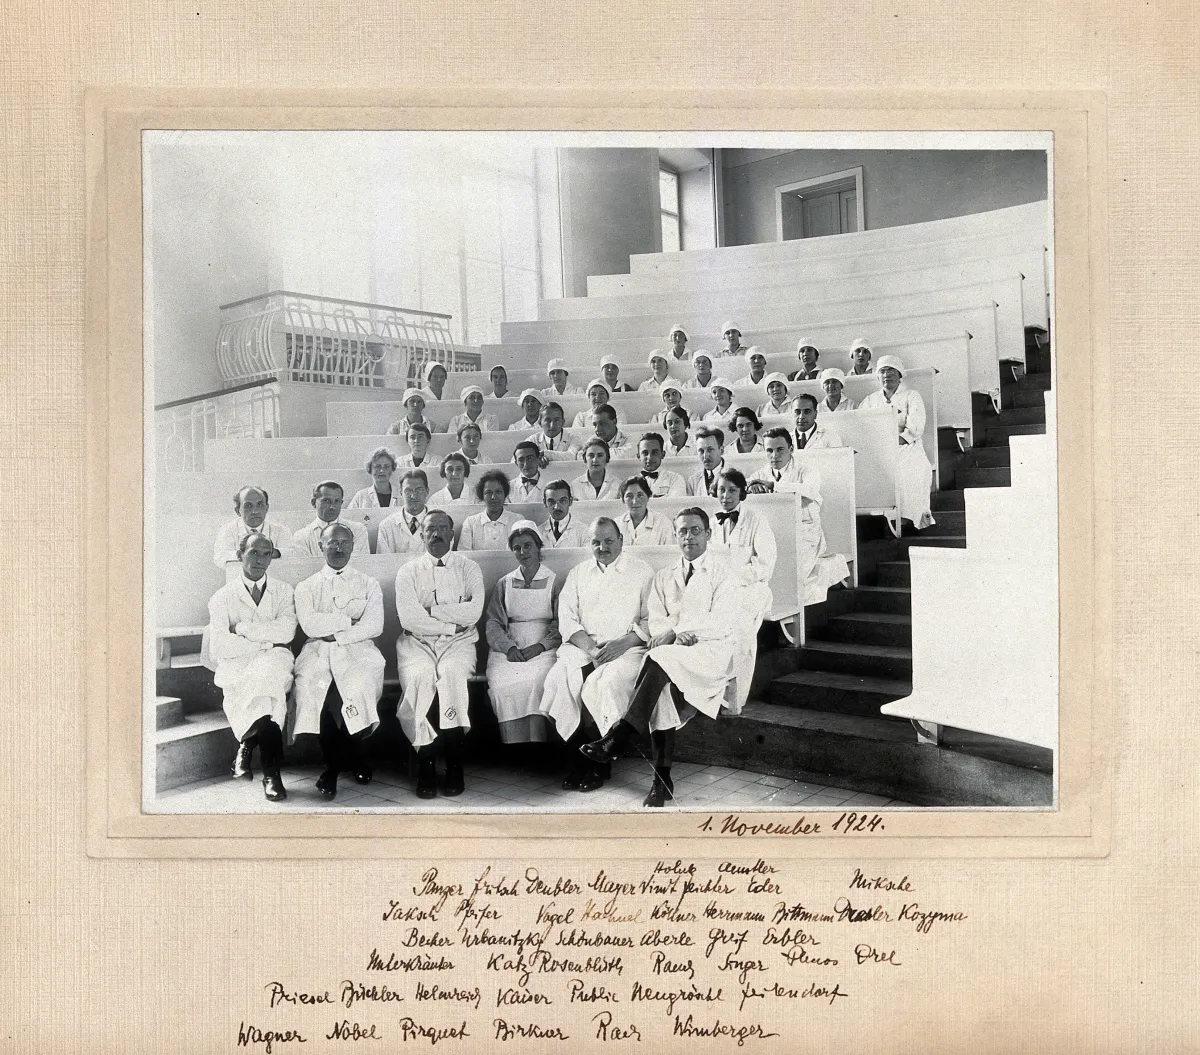 Black and white photo of dozens of doctors and nurses sitting in a medical auditorium in 1924.